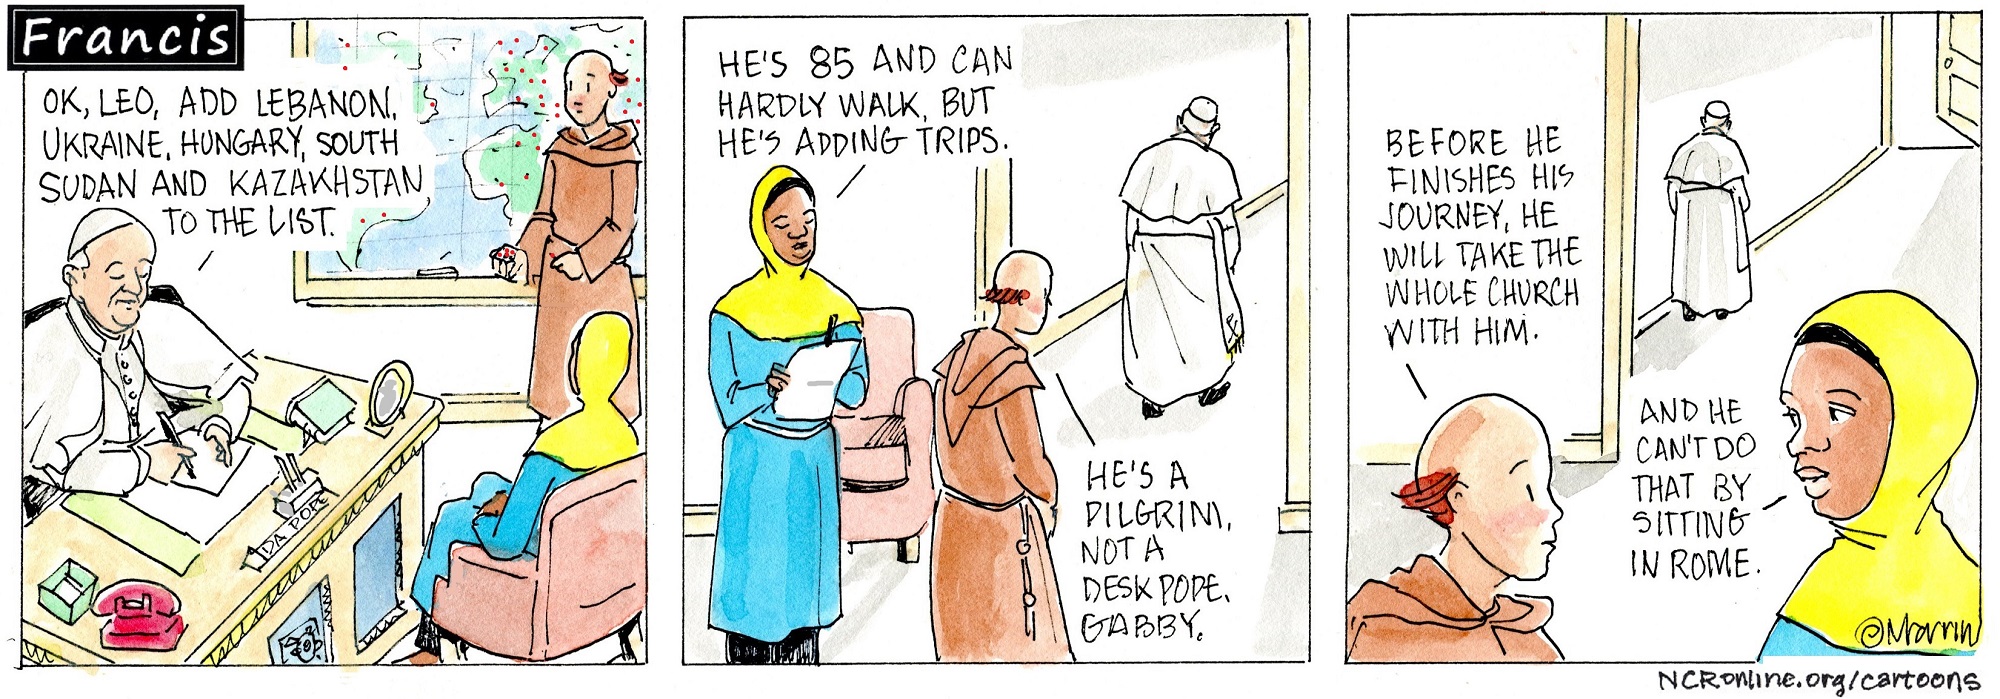 Francis, the comic strip: Francis plans more trips before finishing his journey.